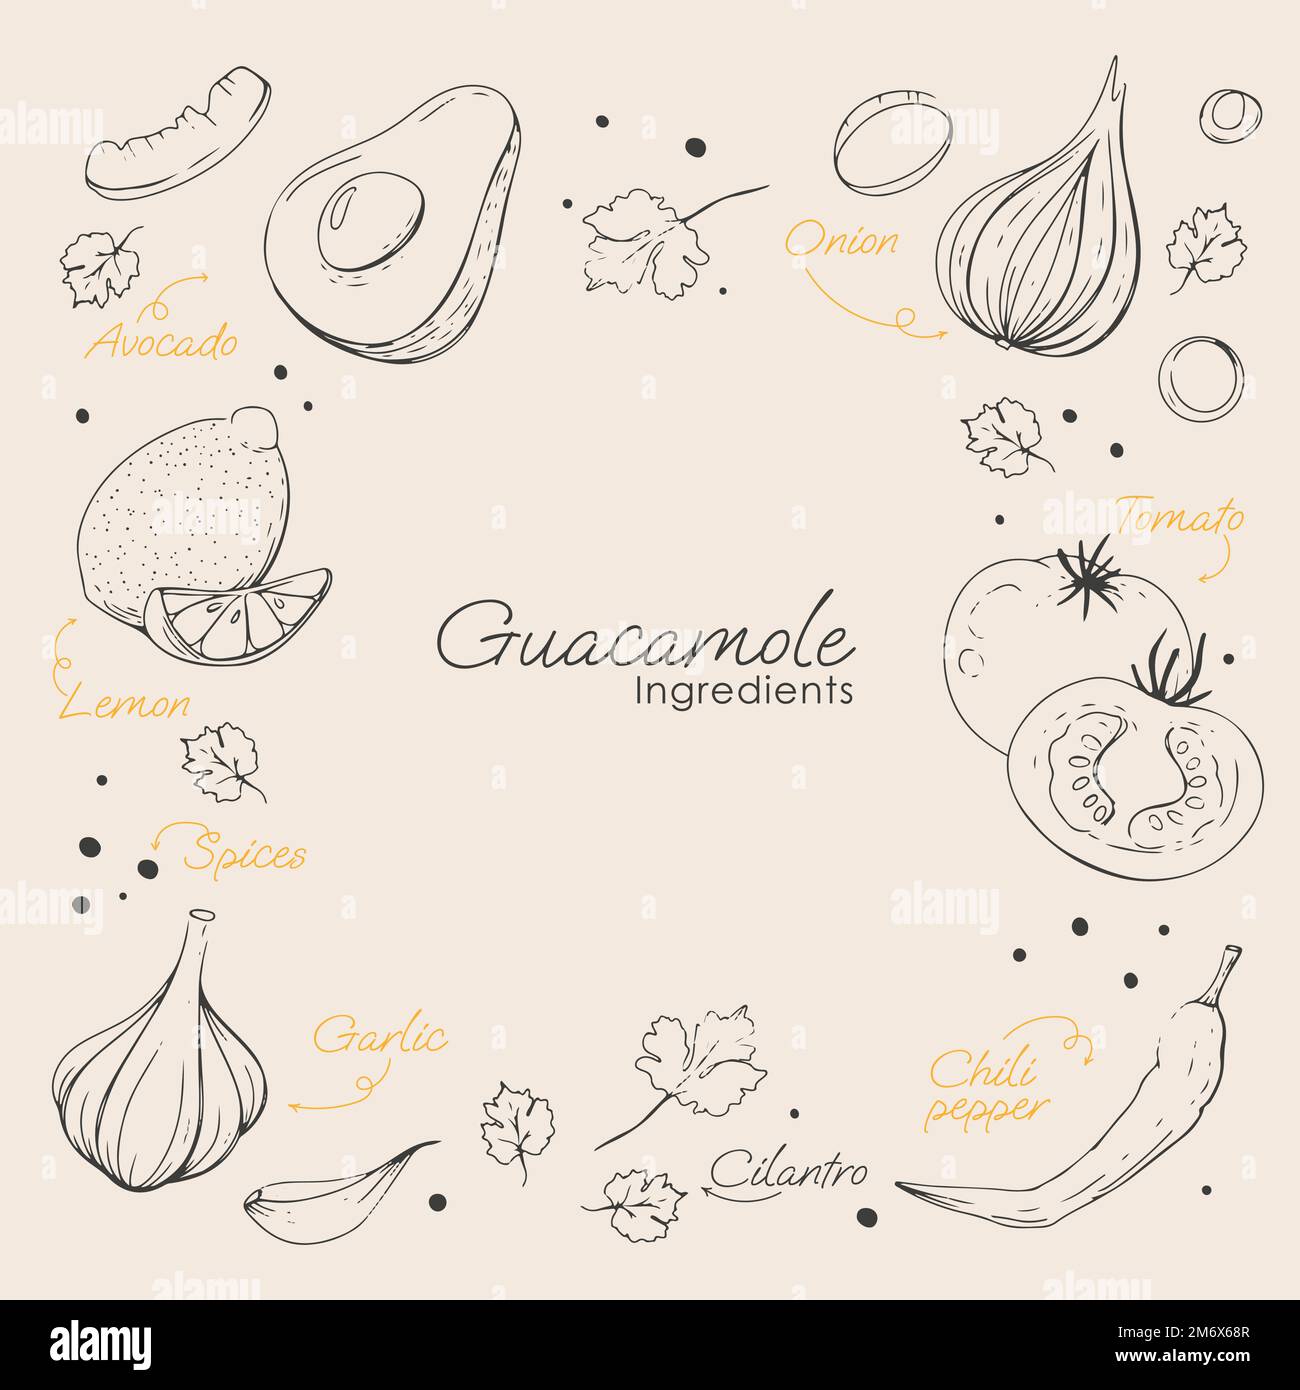 guacamole ingredients in hand drawn style in illustration Stock Vector